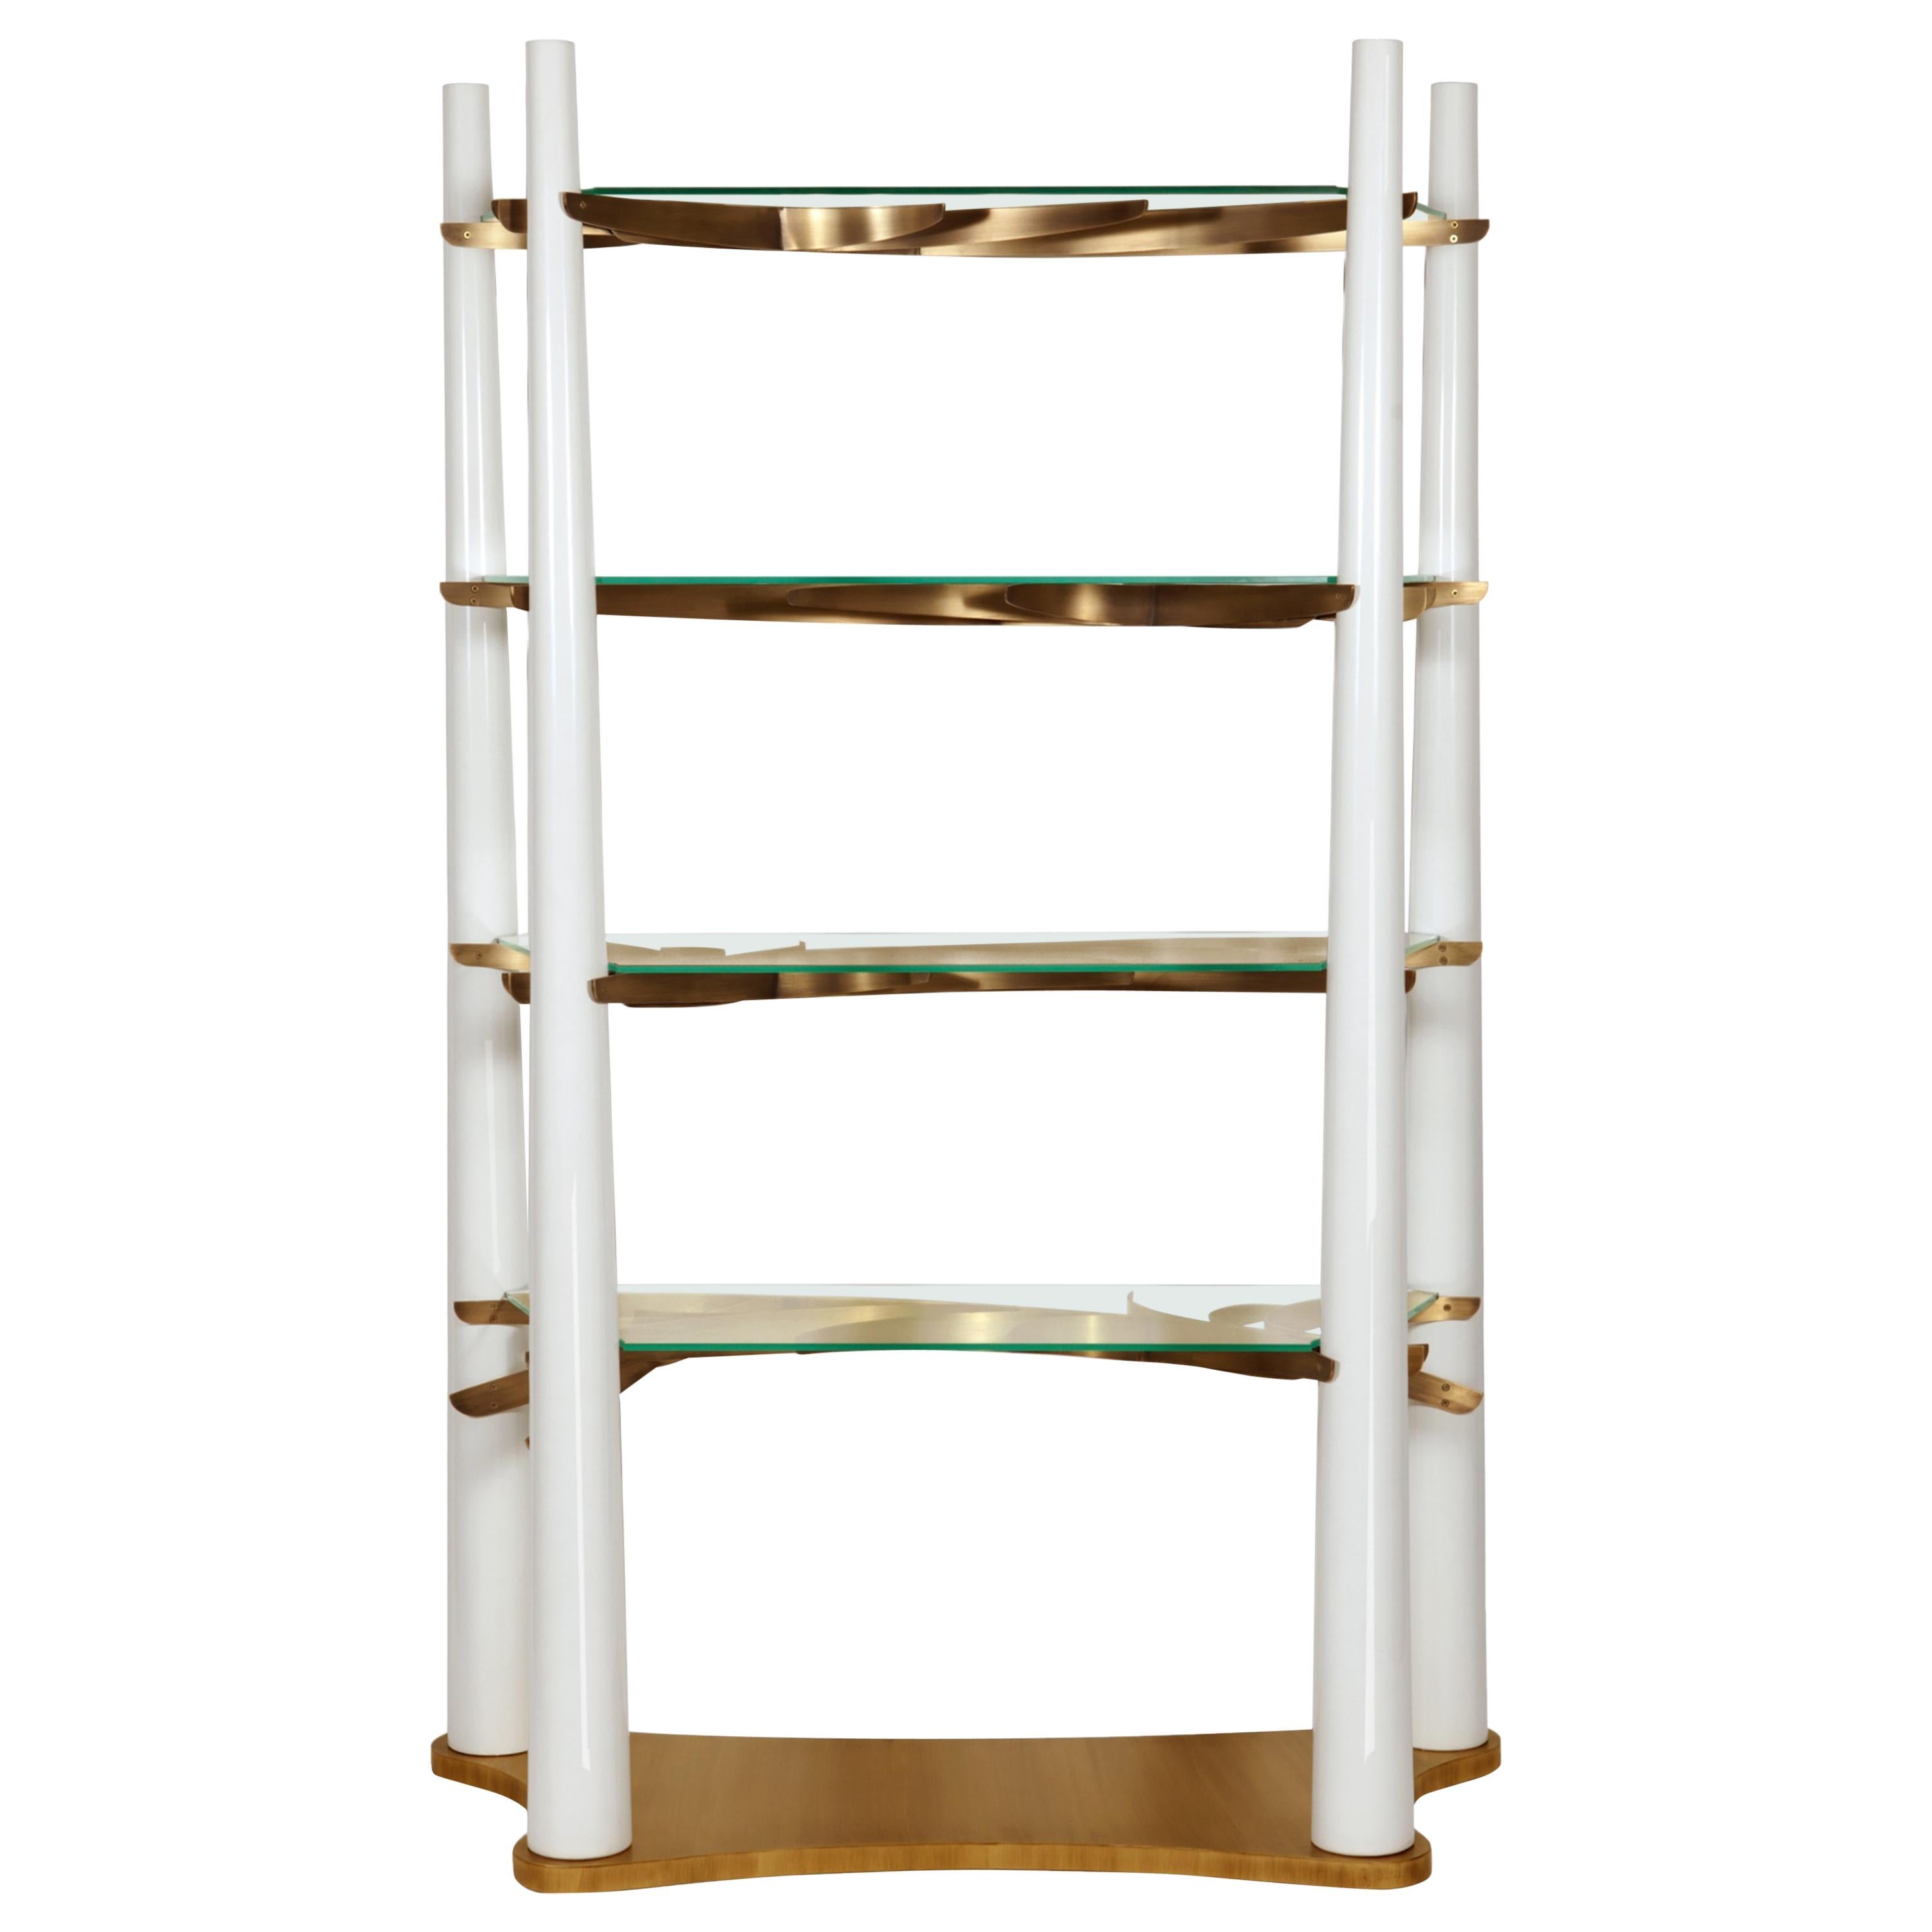 Into The Woods Bookcase, White and Brass, InsidherLand by Joana Santos Barbosa For Sale